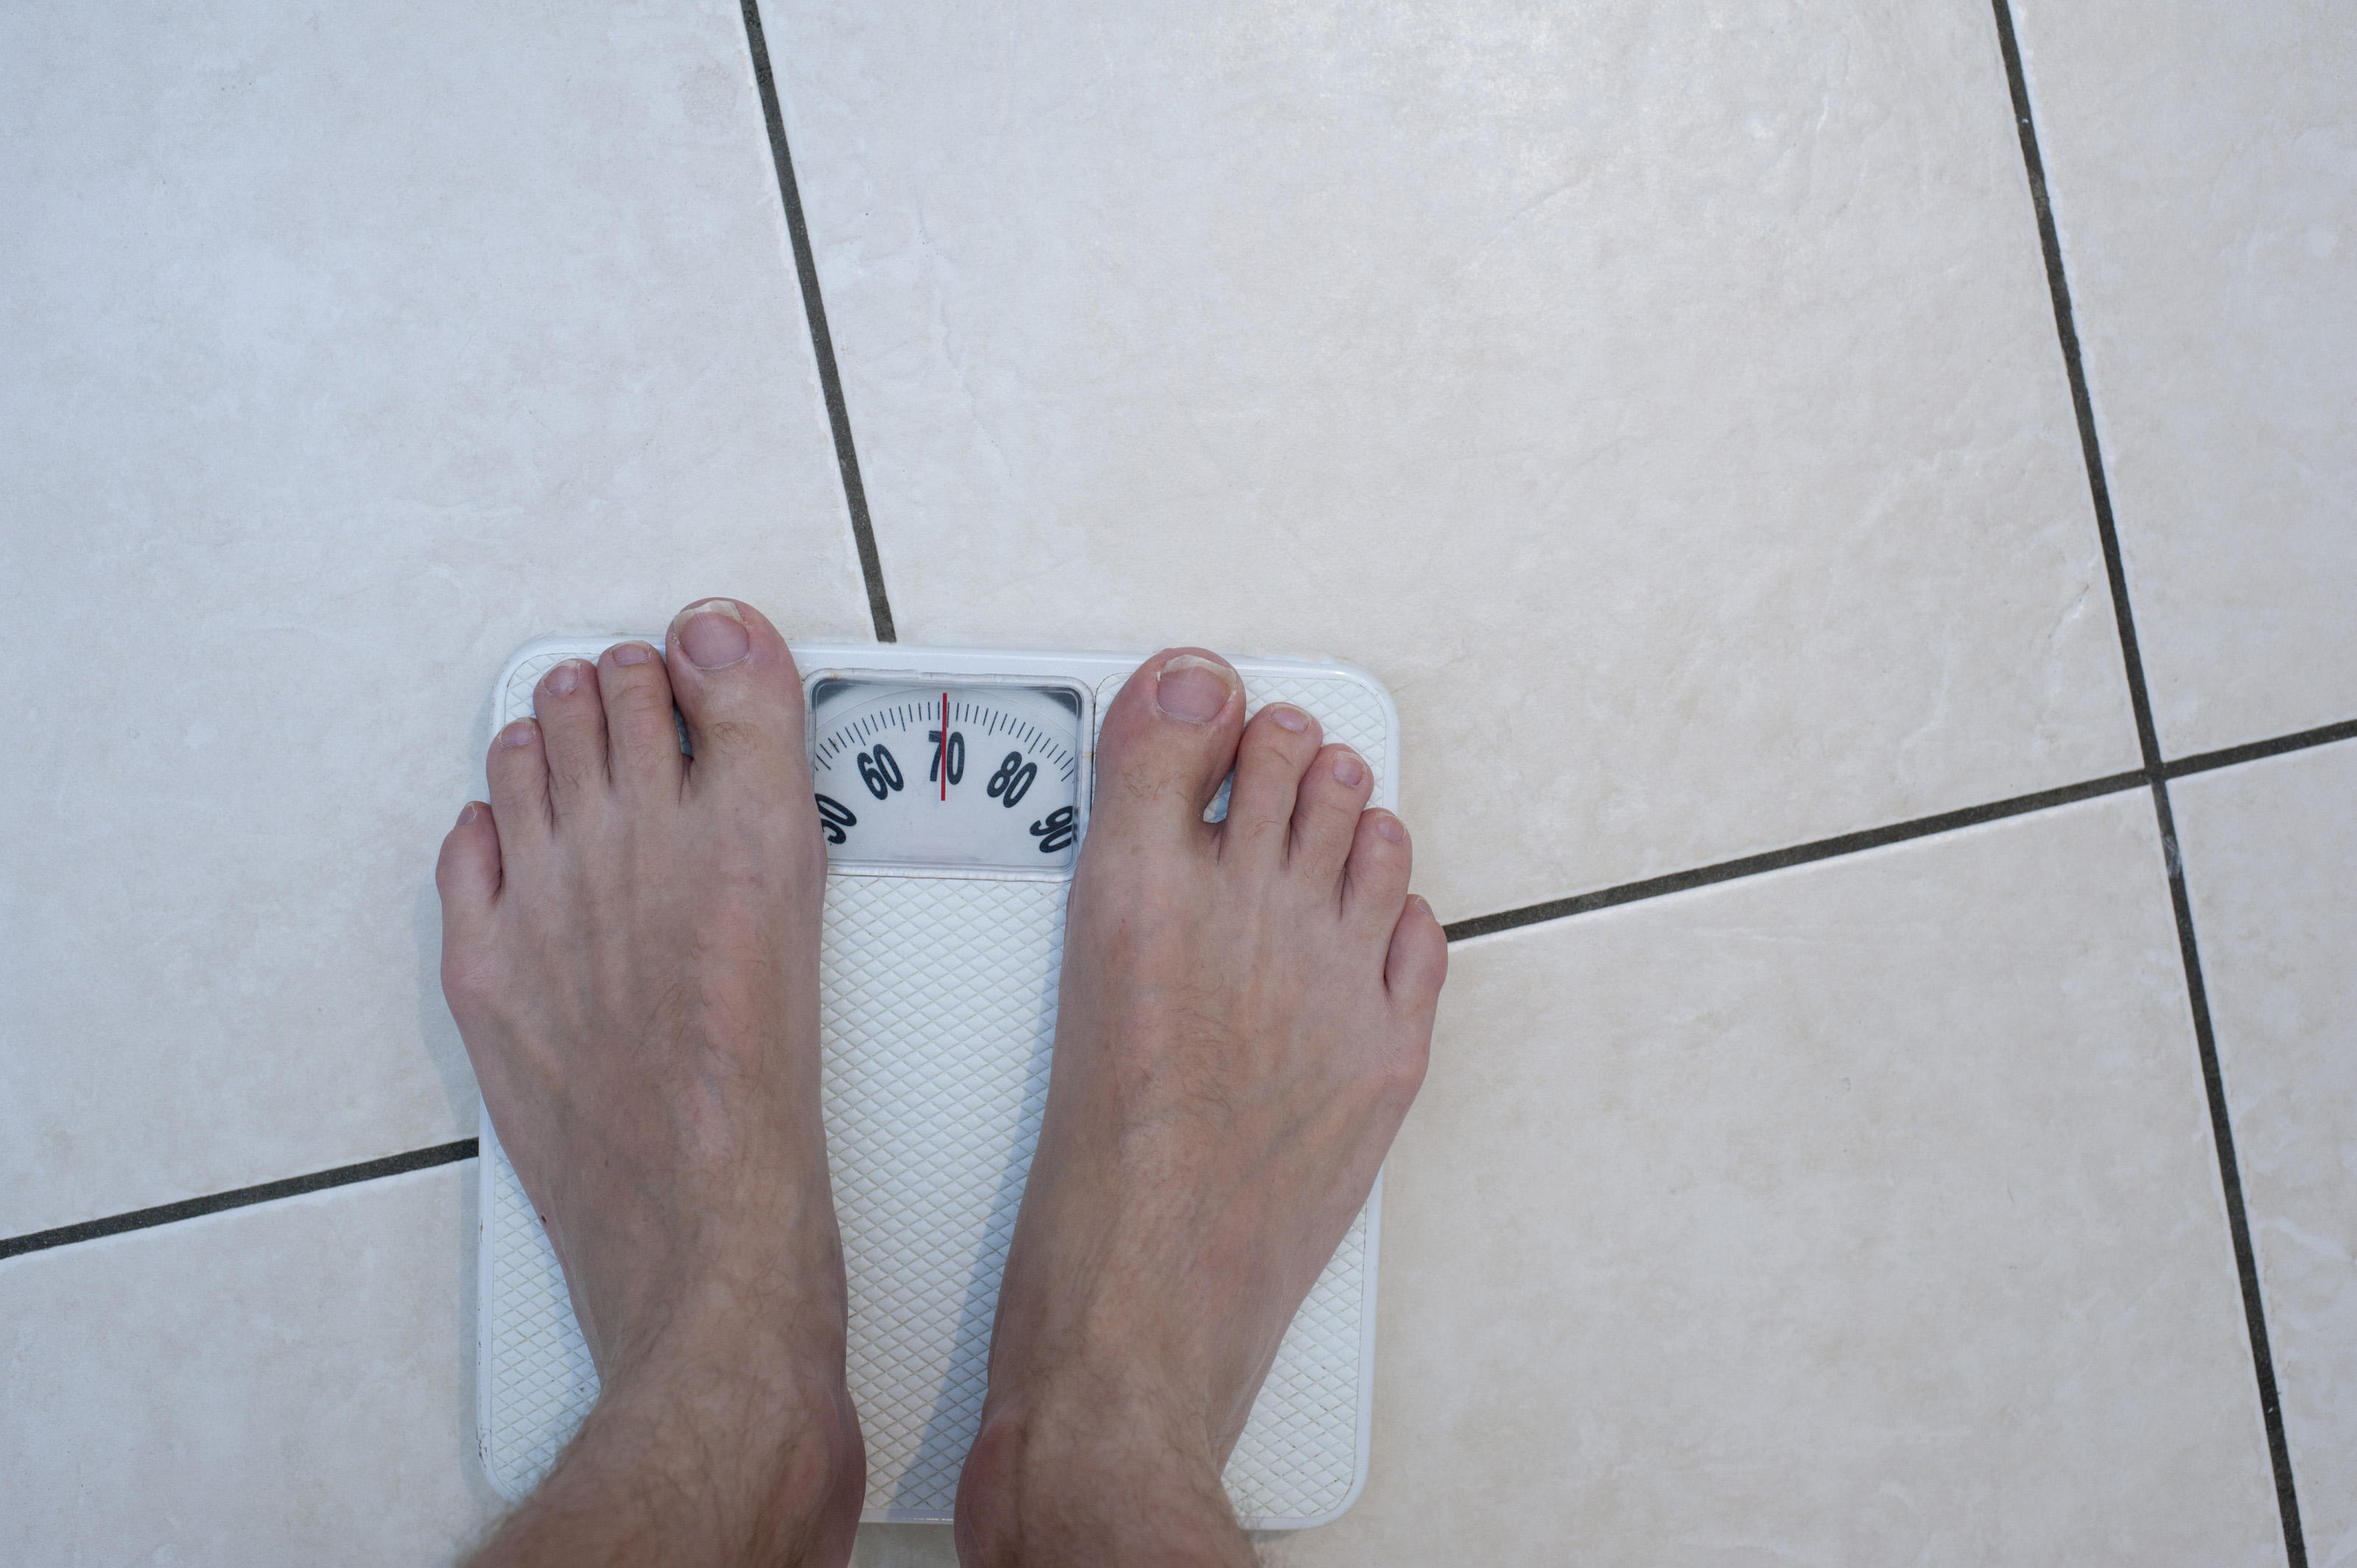 Free Stock Photo 6896 Feet and bathroom scale | freeimageslive